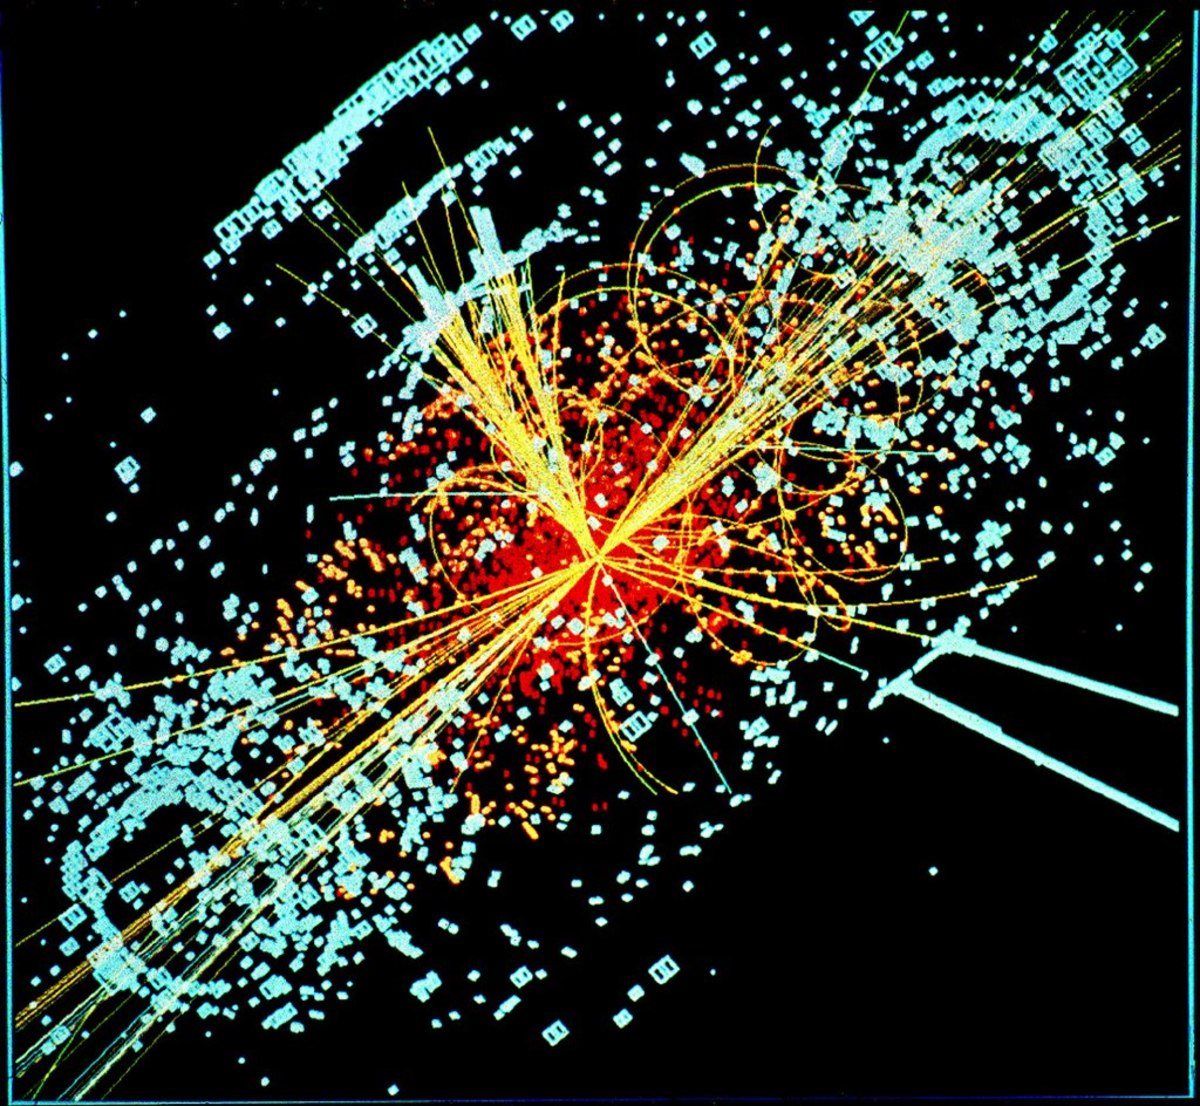 A simulated event in the CMS detector of the Large Hadron Collider, featuring a possible appearance of the Higgs boson